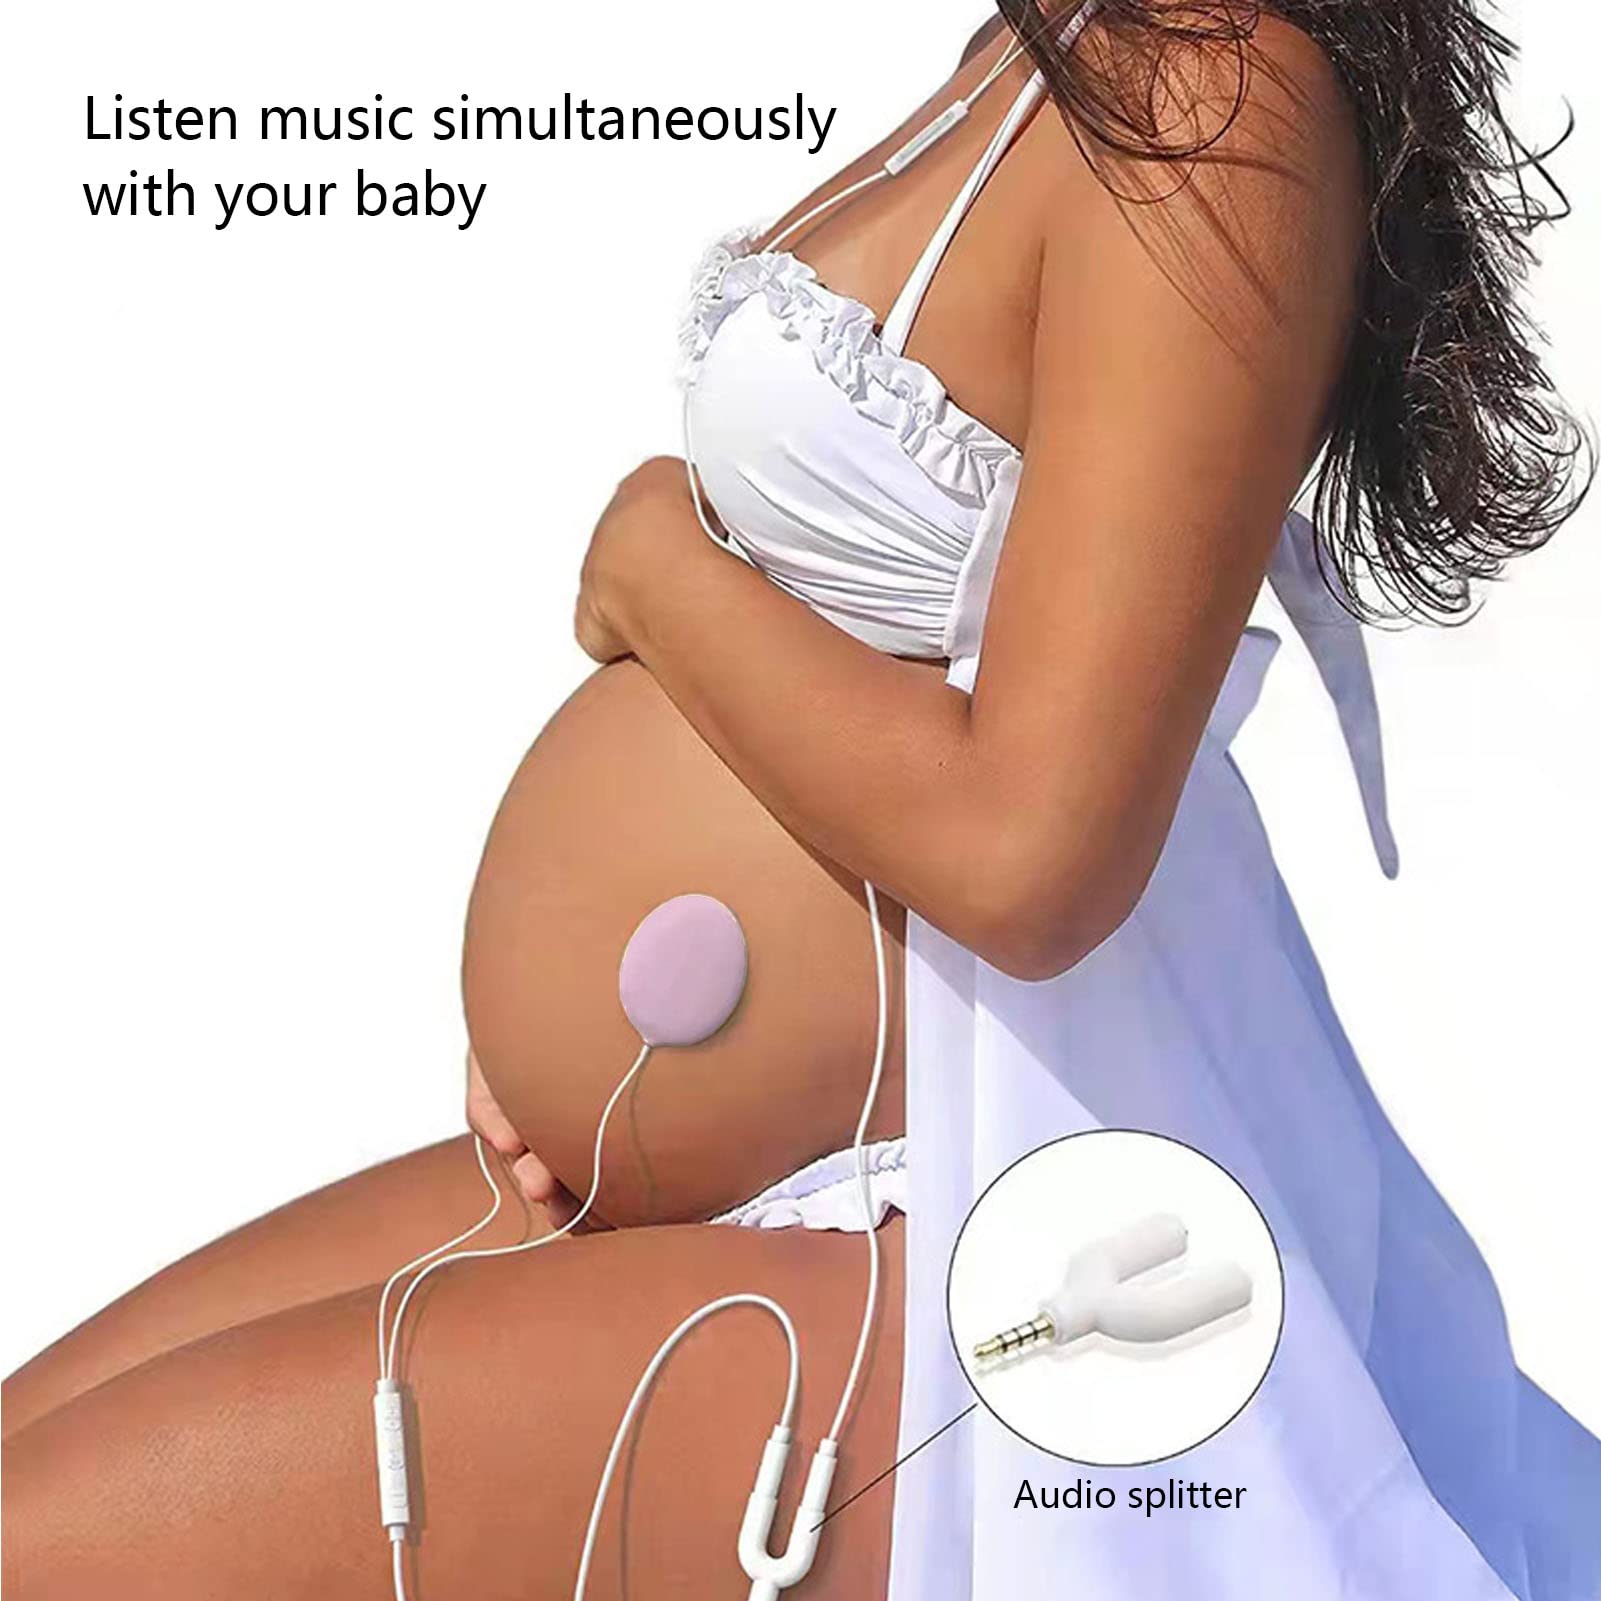 Headphones Music Headphones Belly Baby Pregnancy, Professional Portable  Music Game, Prenatal Belly Speaker for Baby in Womb Mom Pregnant Baby Shower